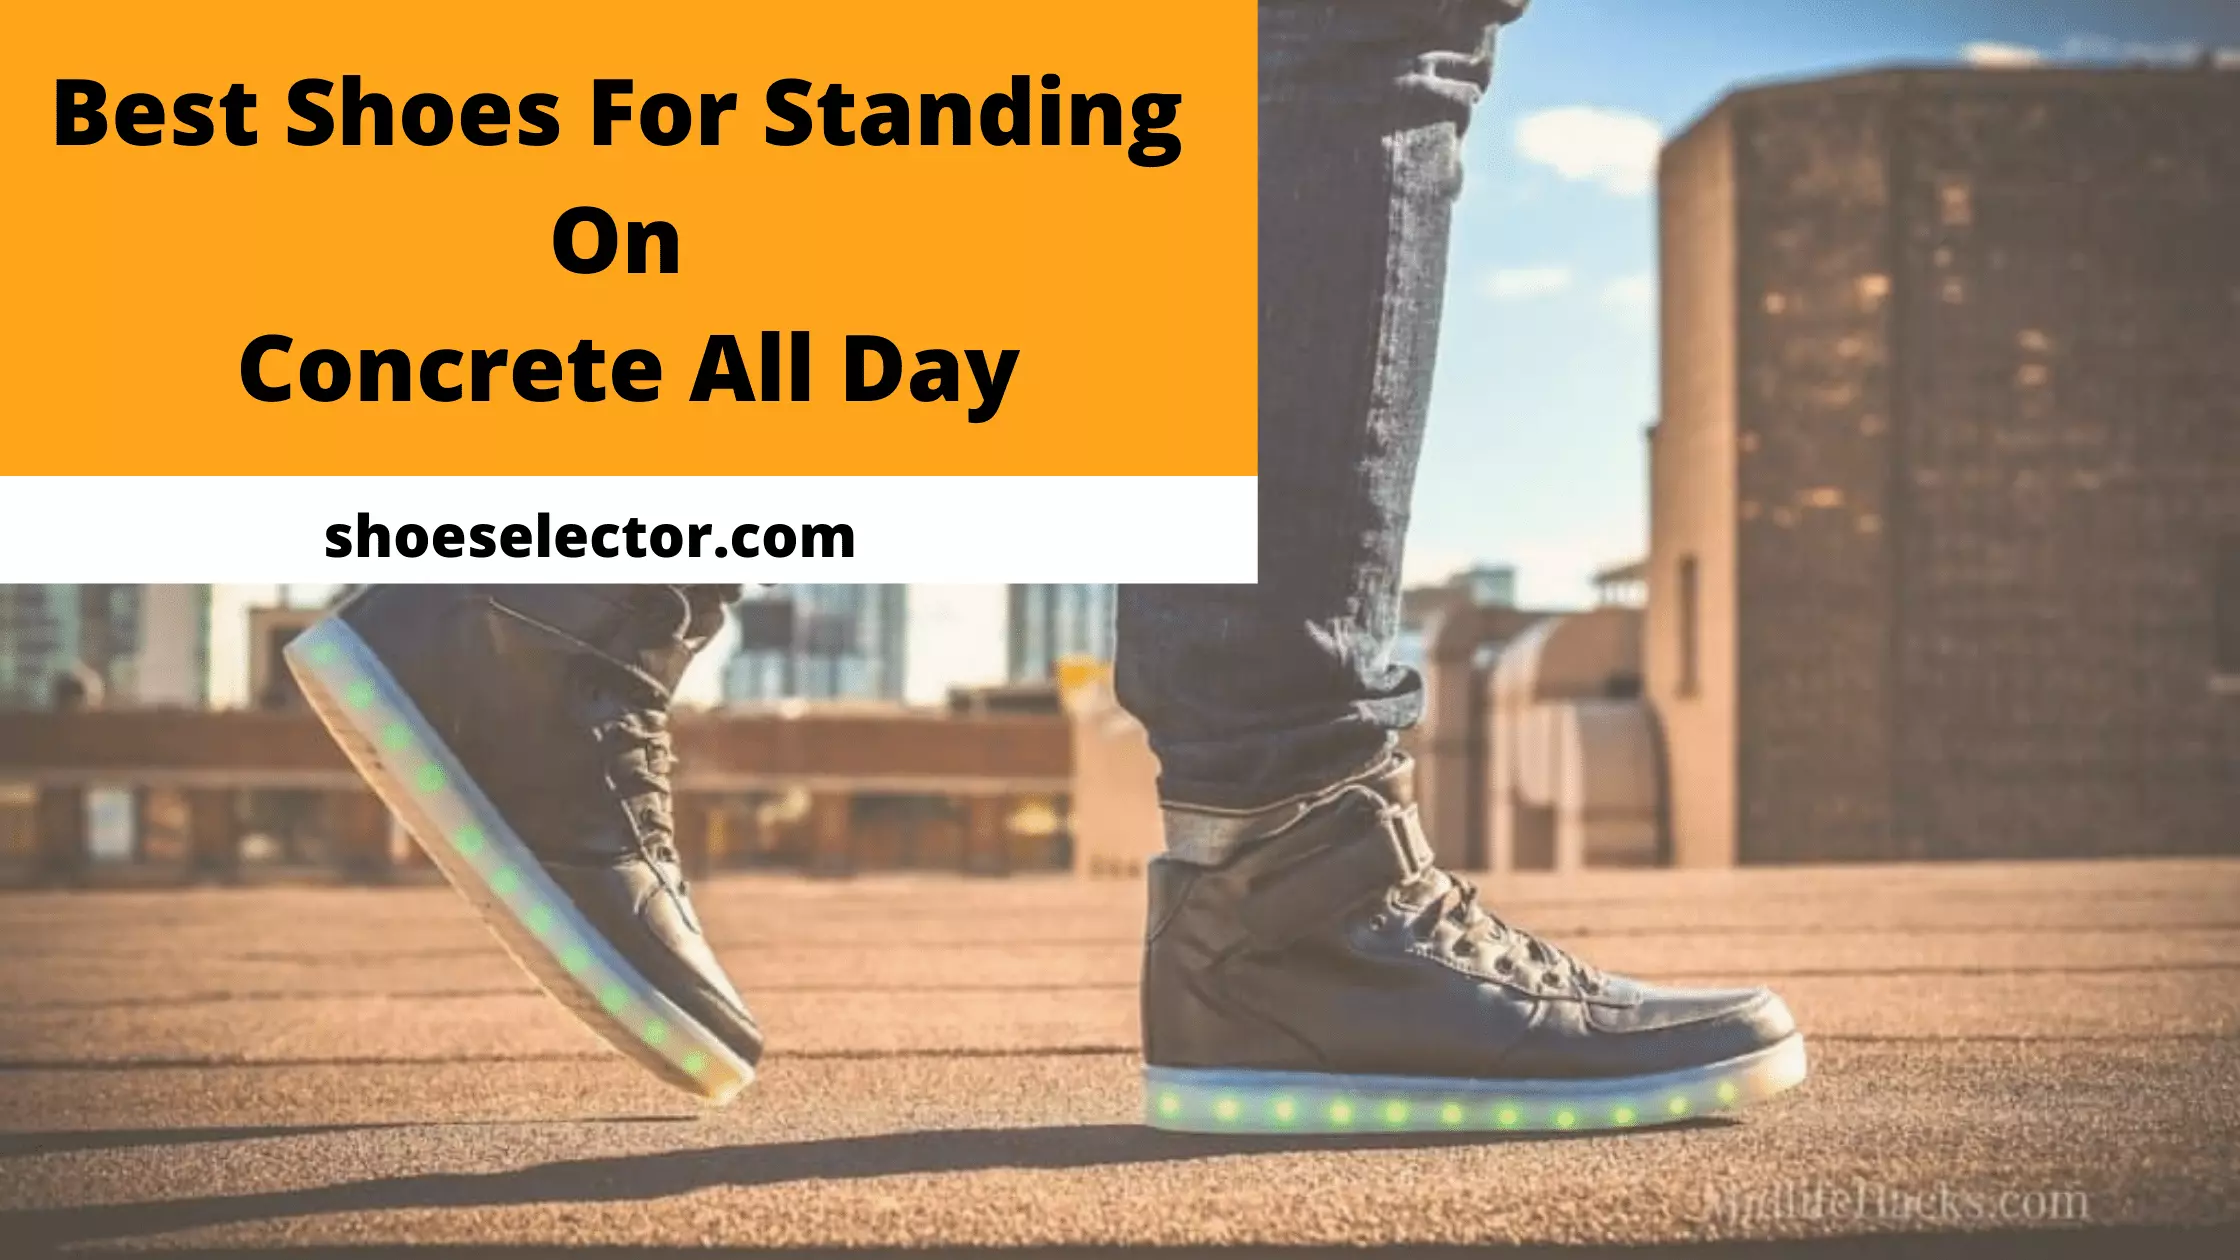 Best Shoes For Standing on Concrete All Day With Buying Guides